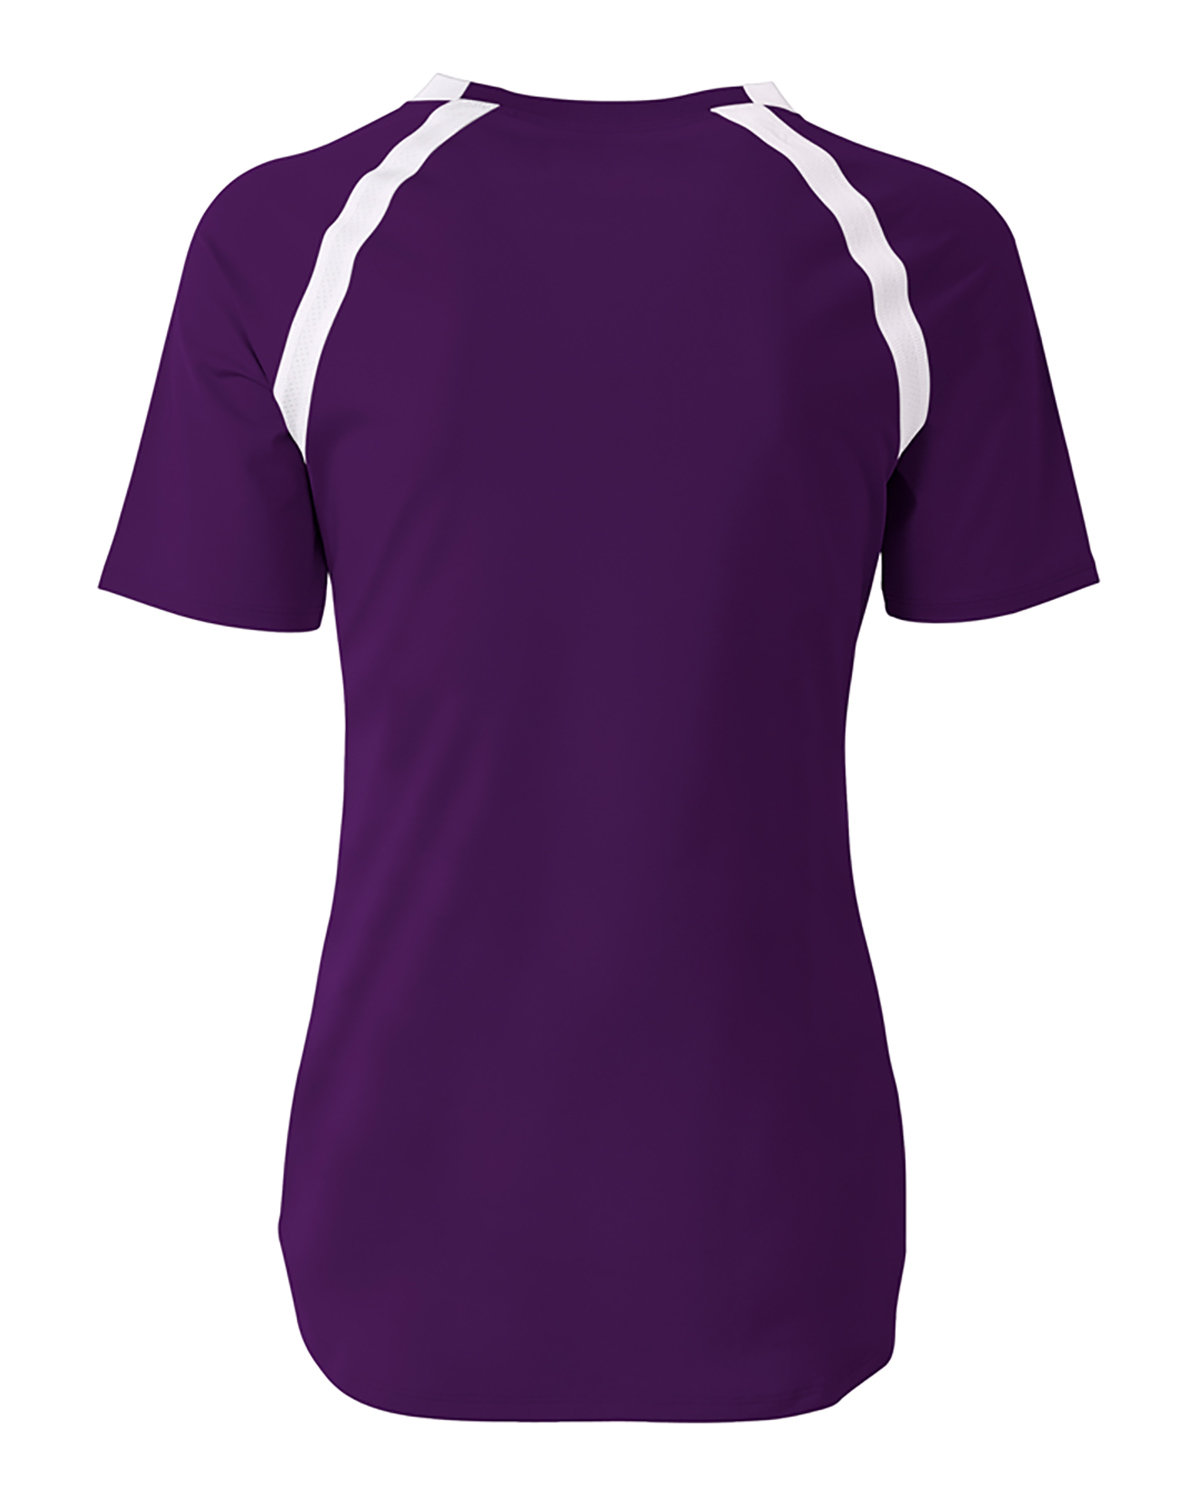 A4 Youth Ace Short Sleeve Volleyball Jersey | alphabroder